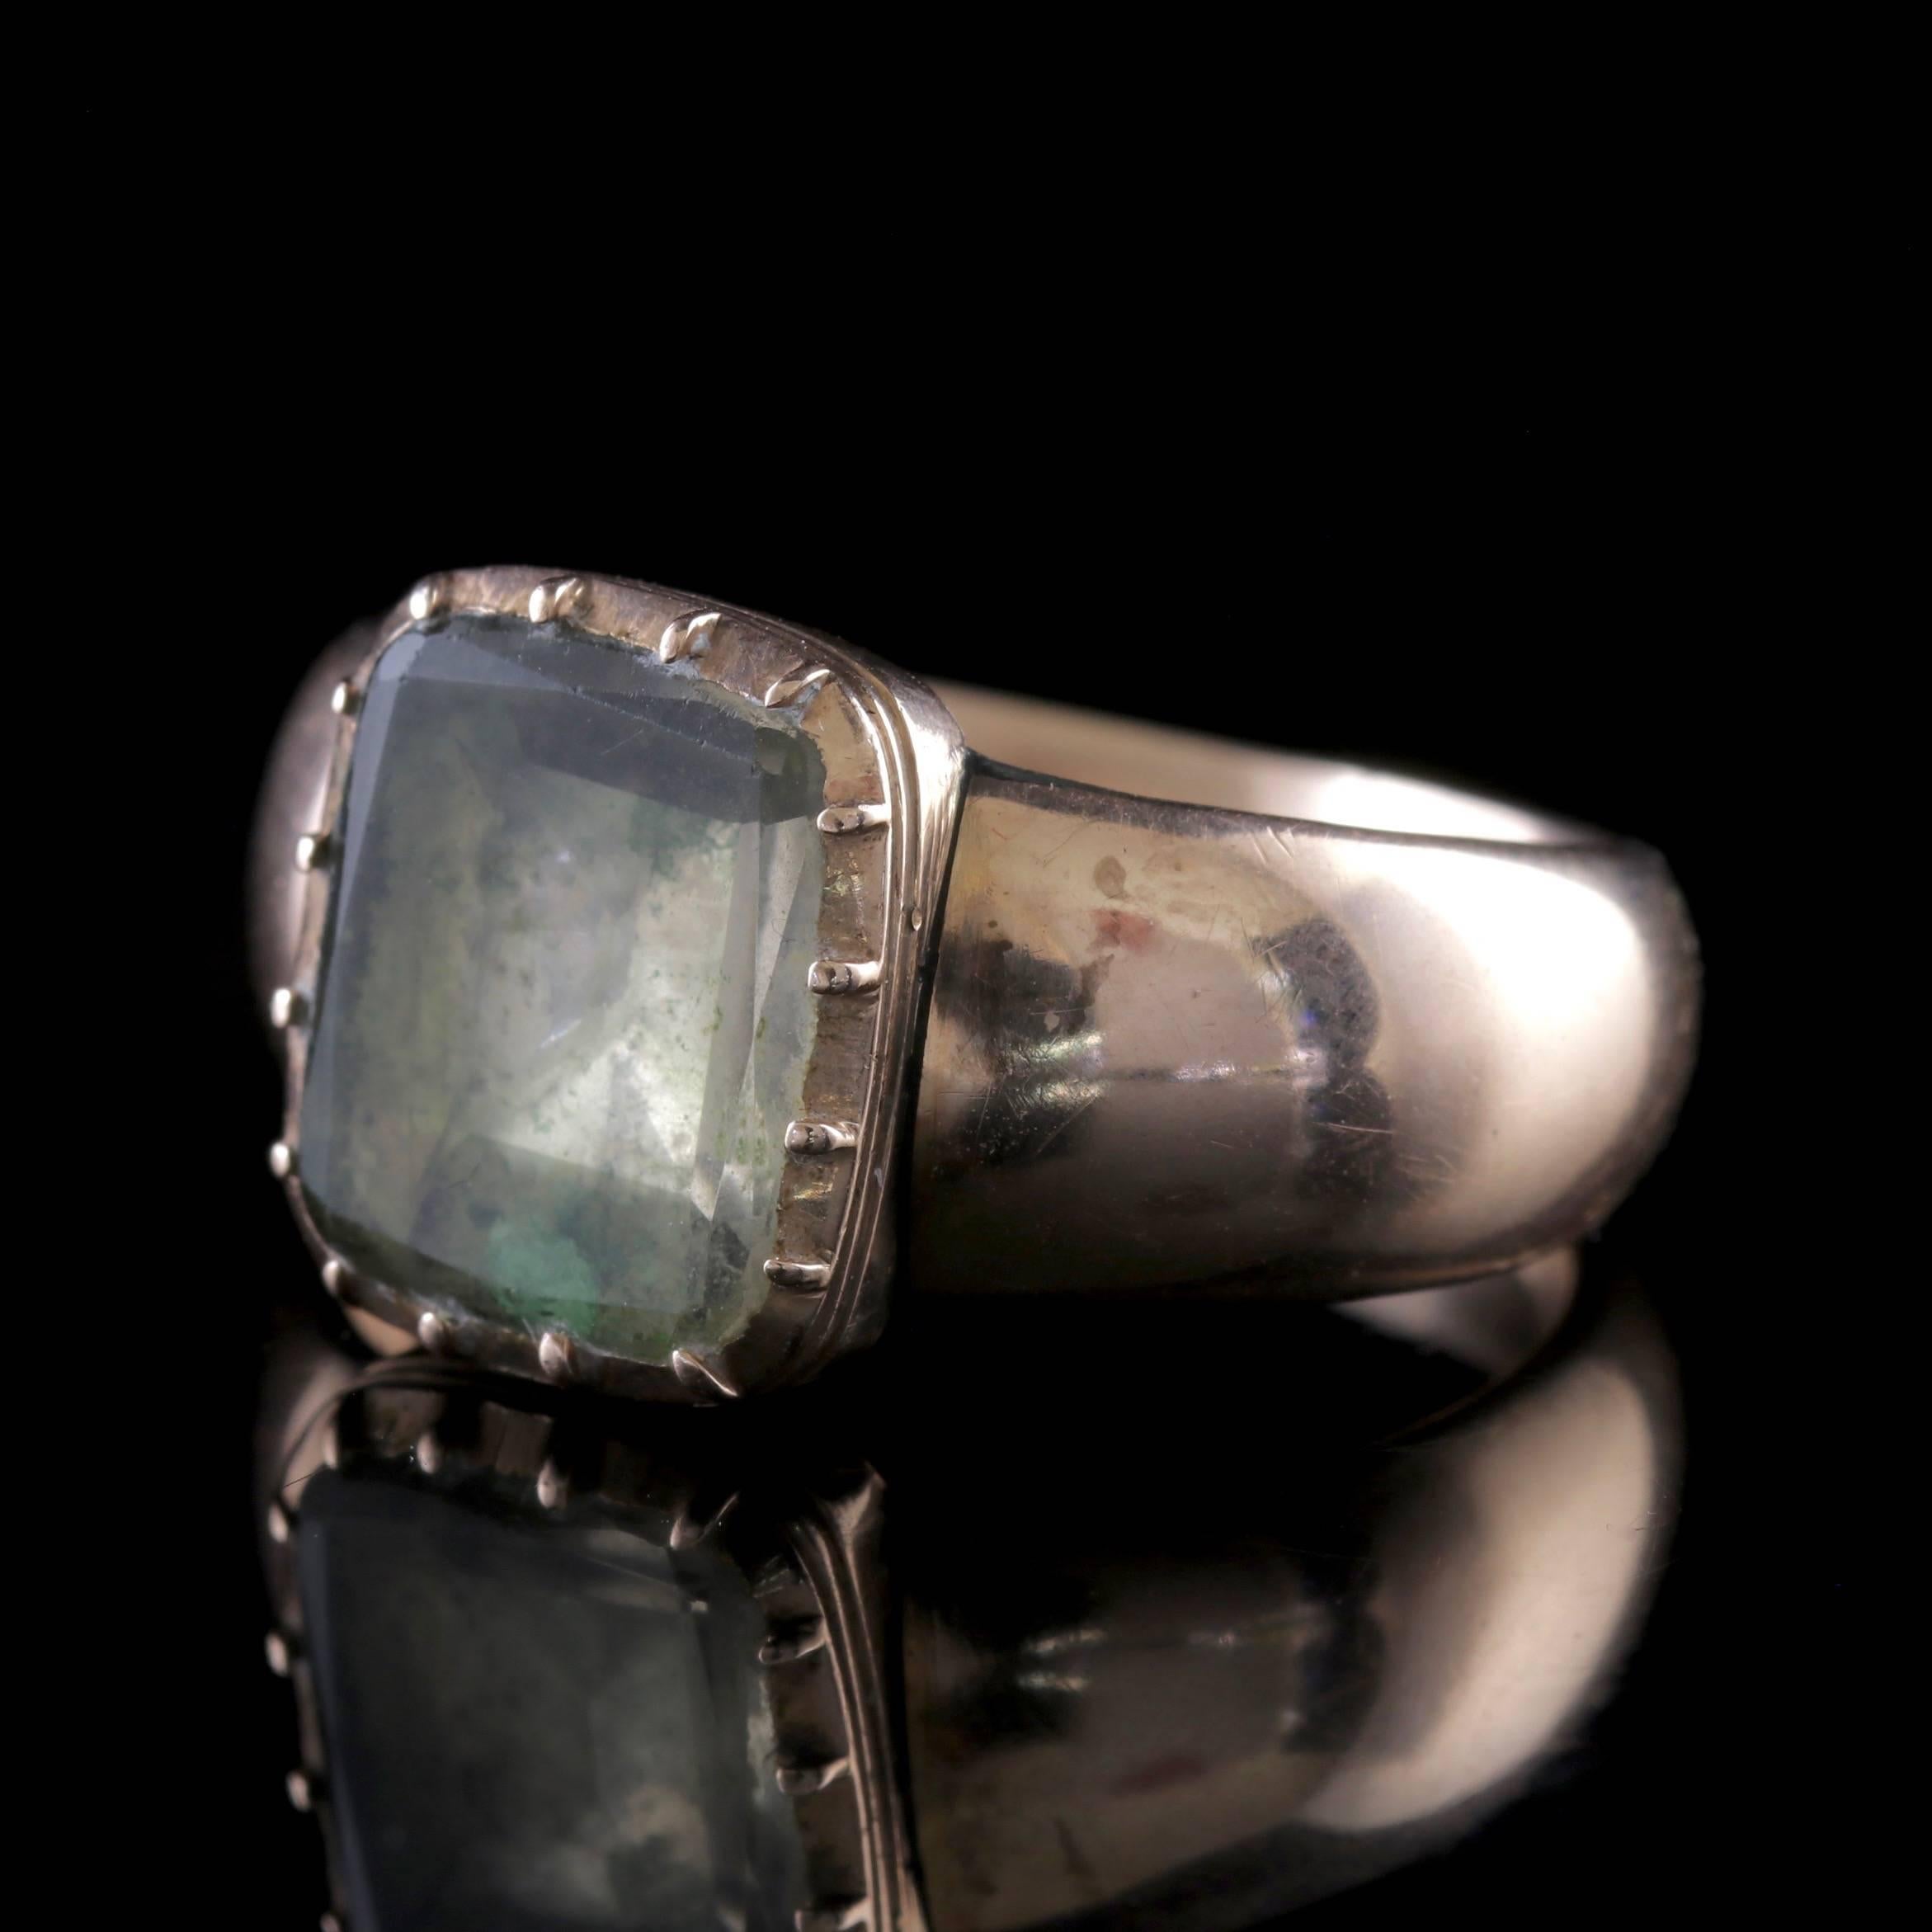 A grand antique Ring from the Georgian era adorned with a foil backed Rock Crystal which is a clear colourless form of Quartz that is highly durable and once believed by ancients to be a form of solidified ice that could never be thawed. 

The stone